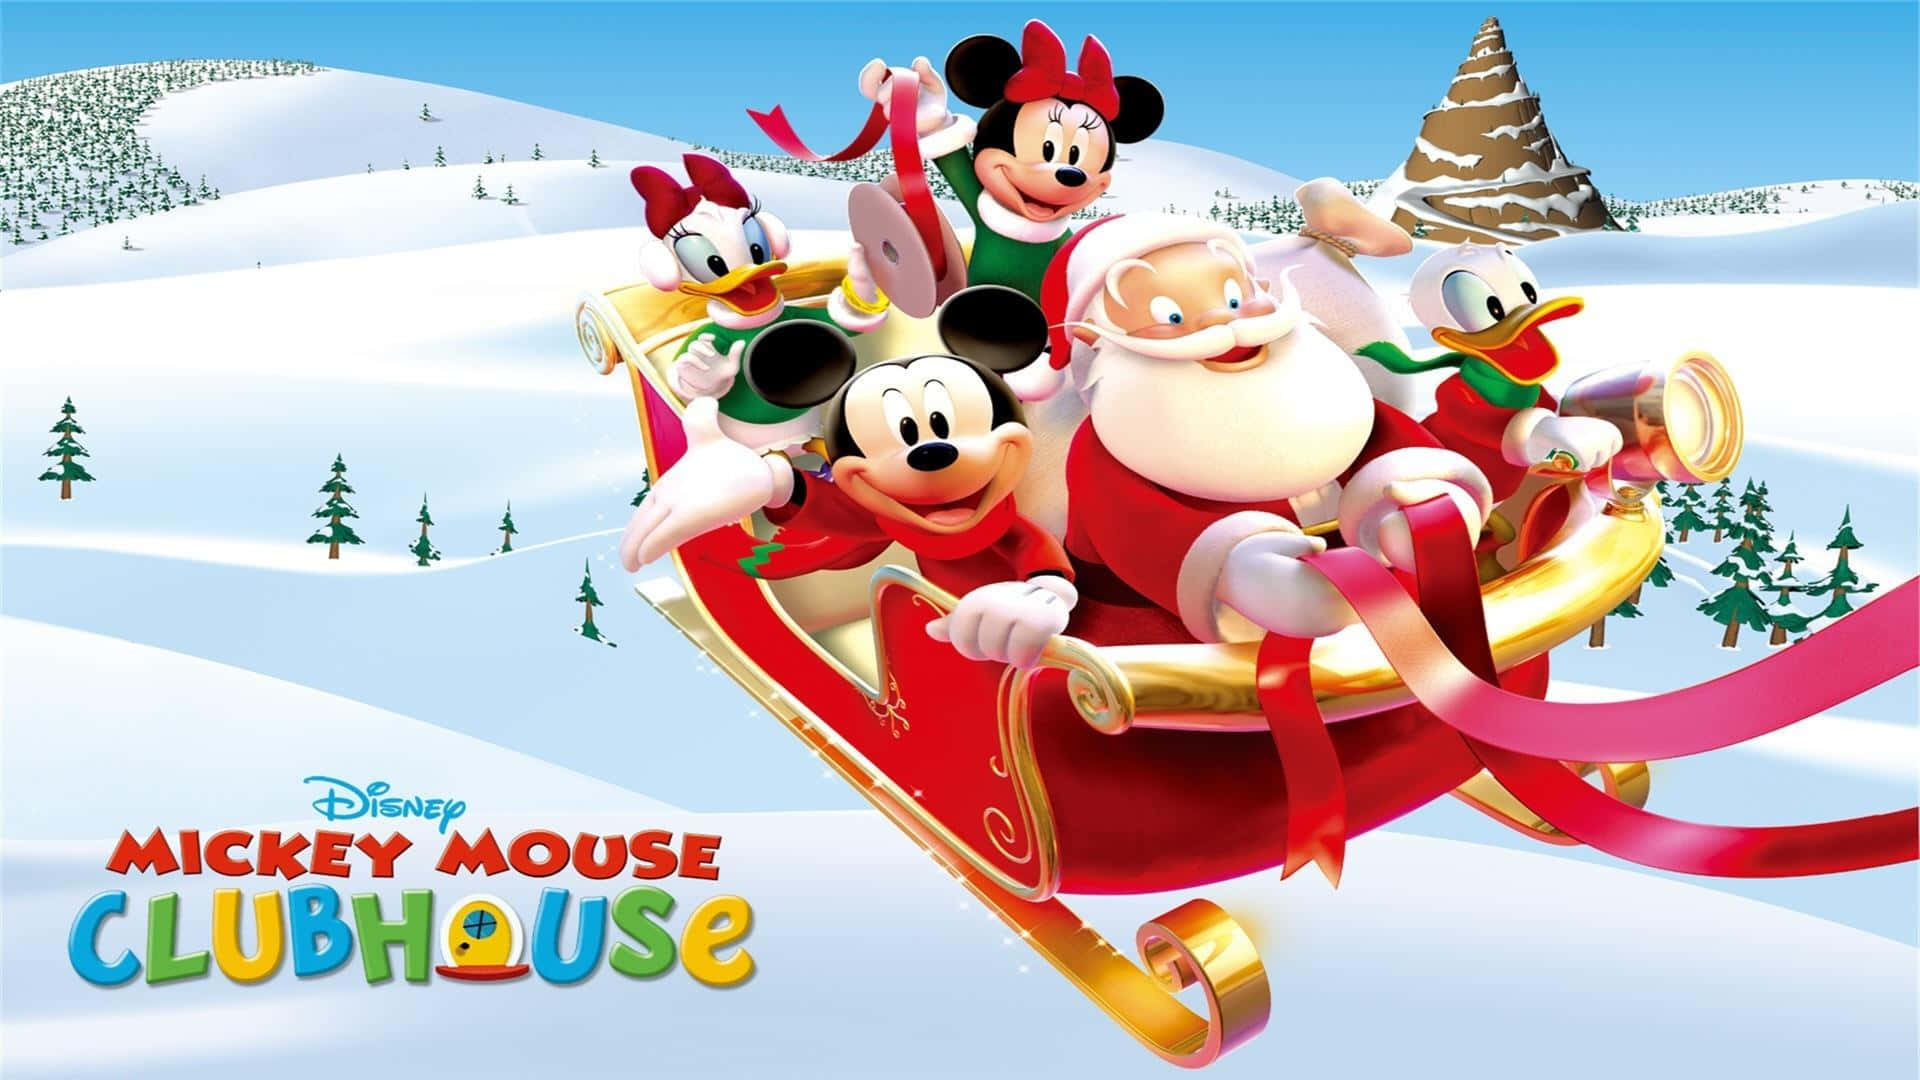 Mickey Mouse Clubhouse 2 - Santa Claus